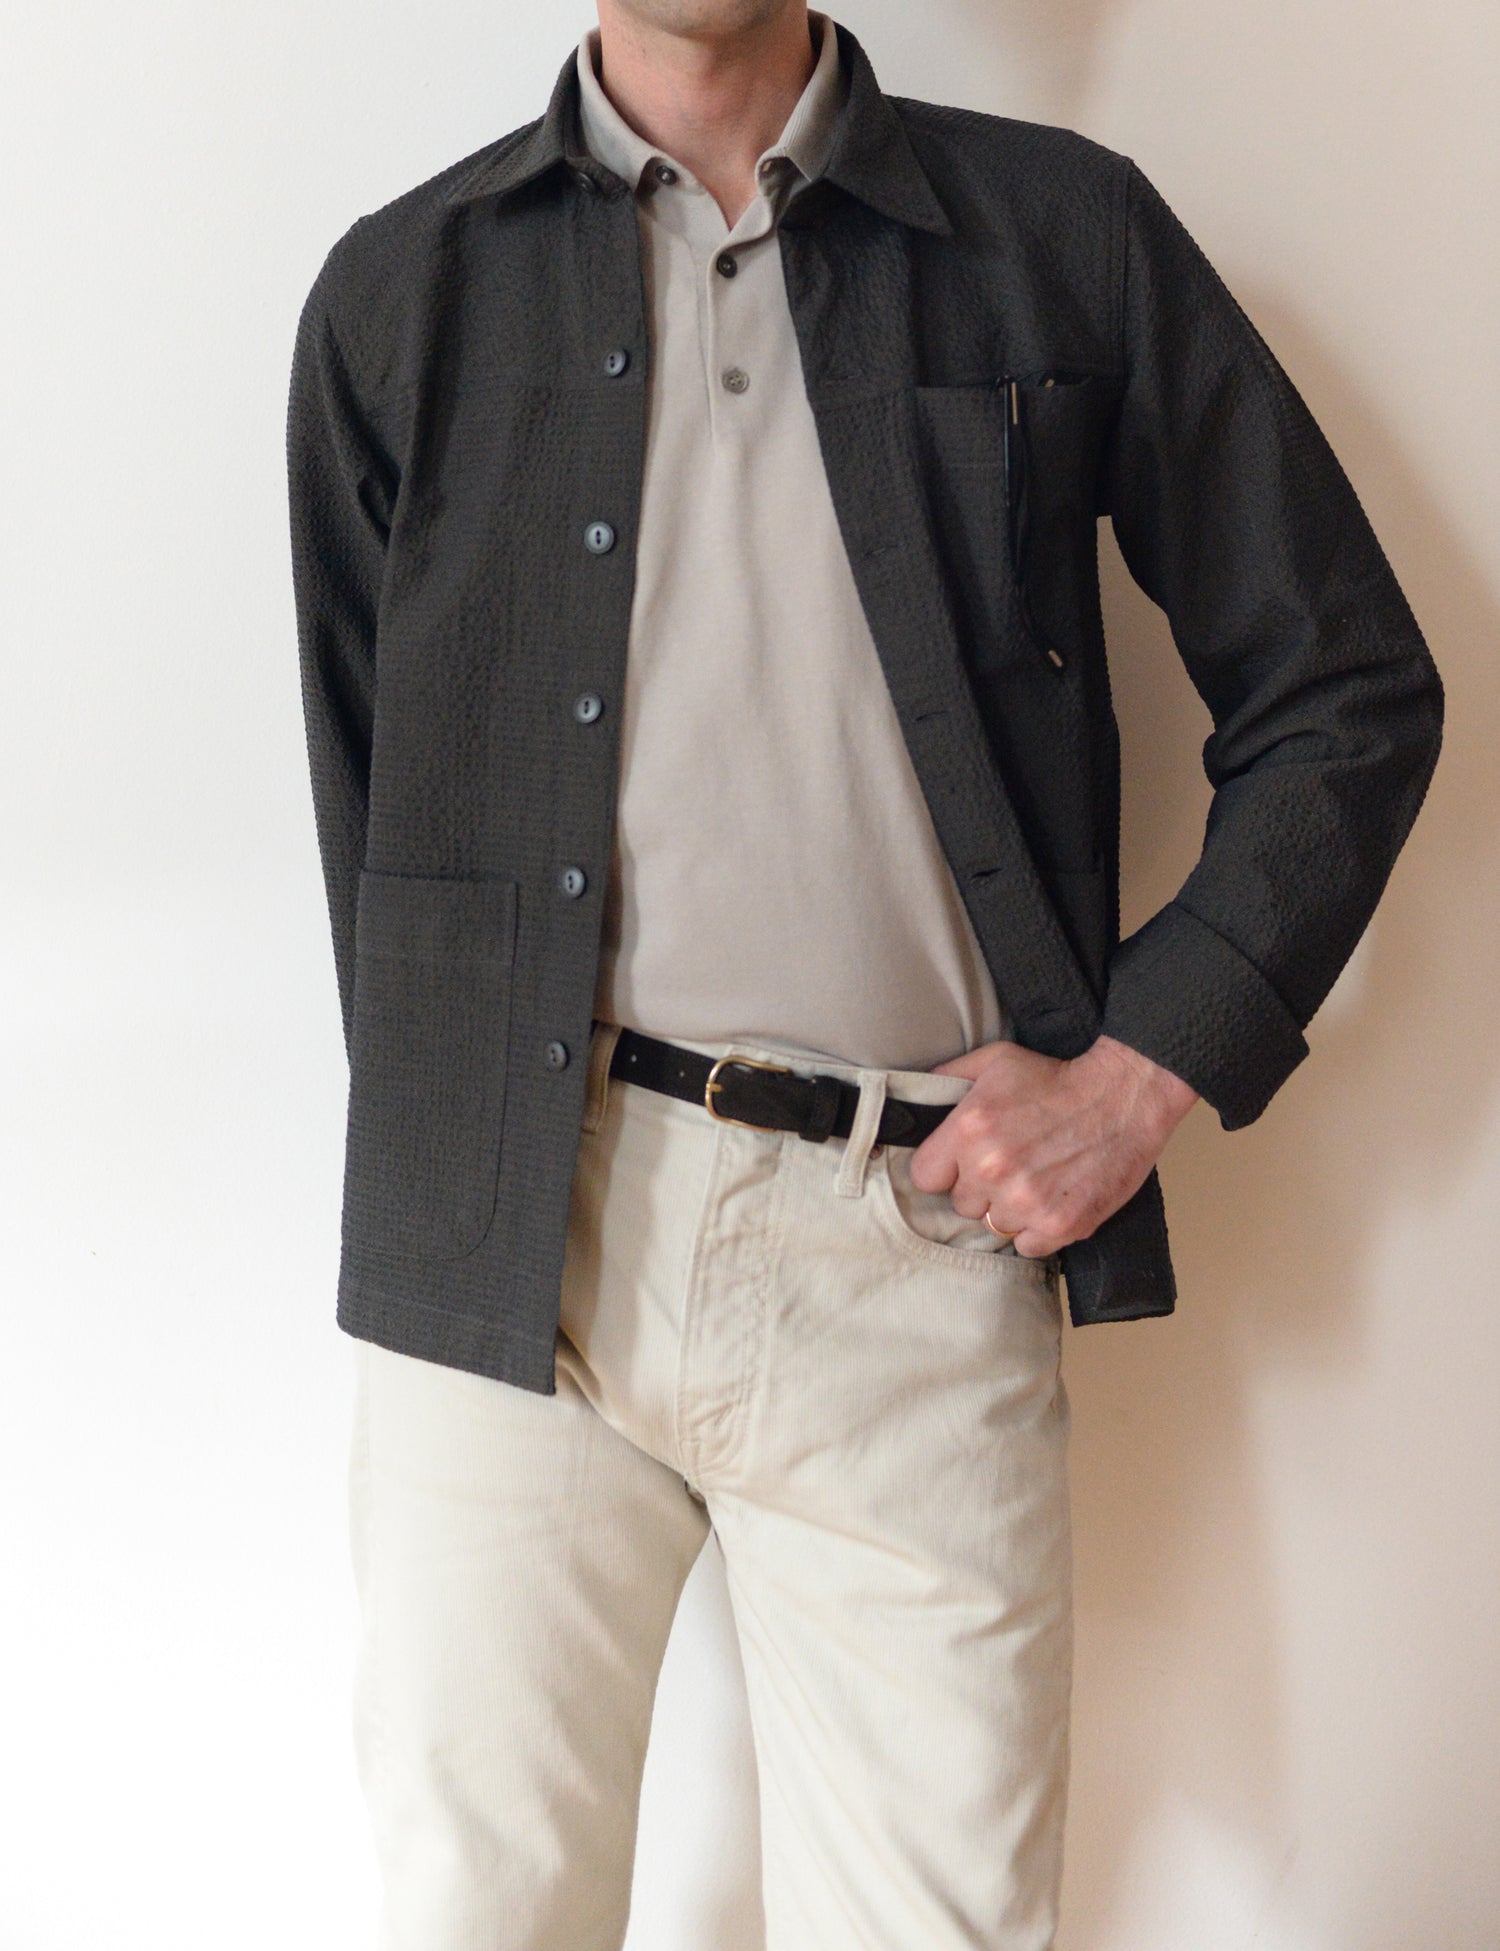 Brooklyn Tailors BKT15 Shirt Jacket in Crinkled Wool & Cotton - Storm on-body shot. Model is wearing gray polo shirt, cream corduroys, a dark brown belt with the shirt jacket. 